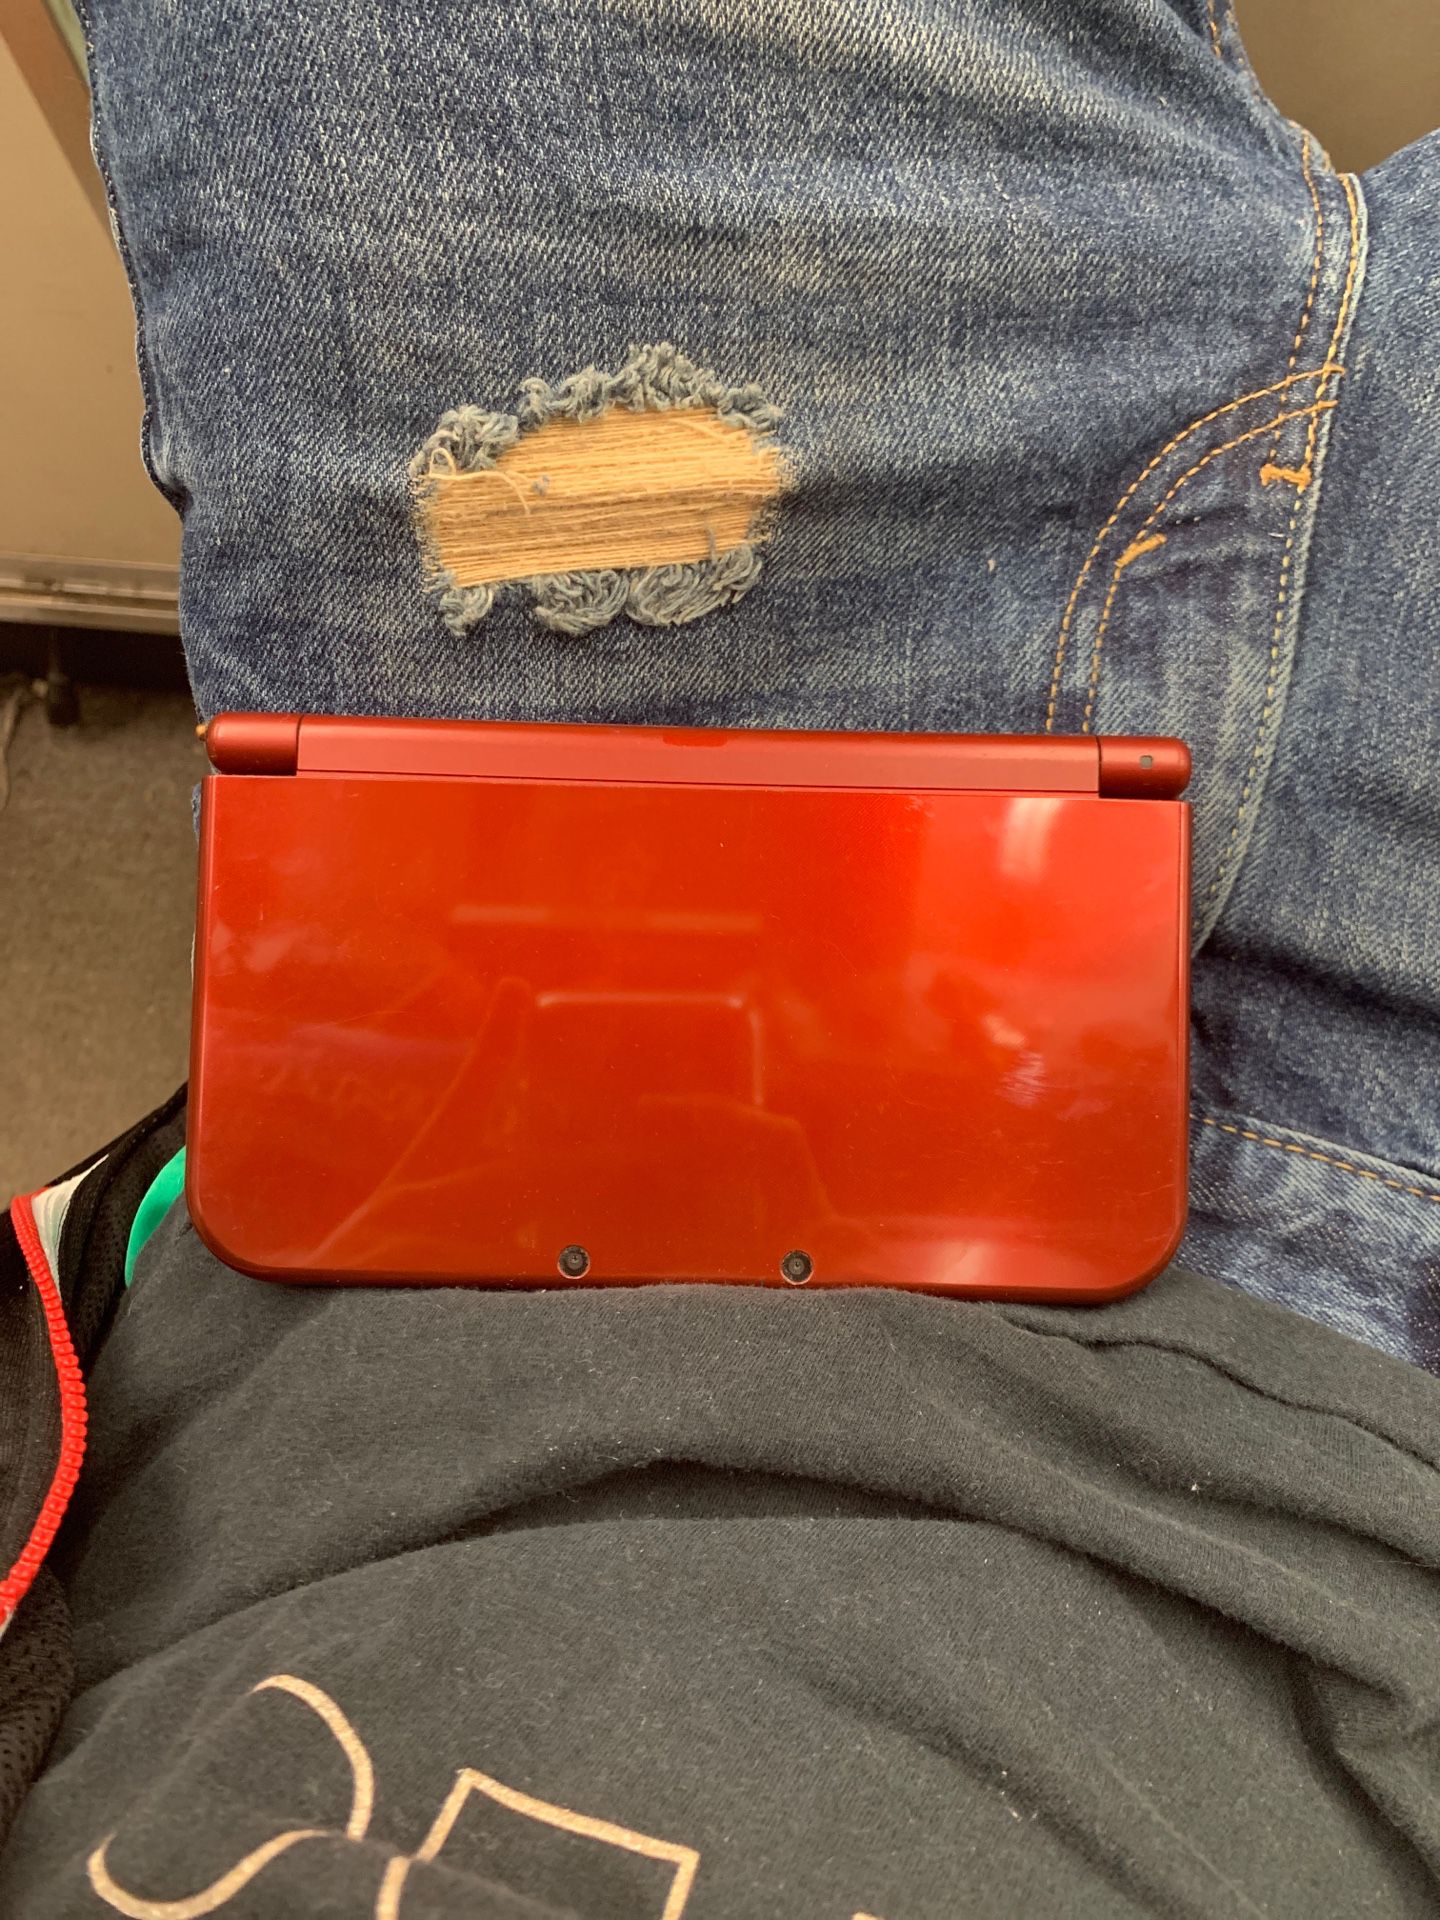 New Nintendo 3ds XL Red